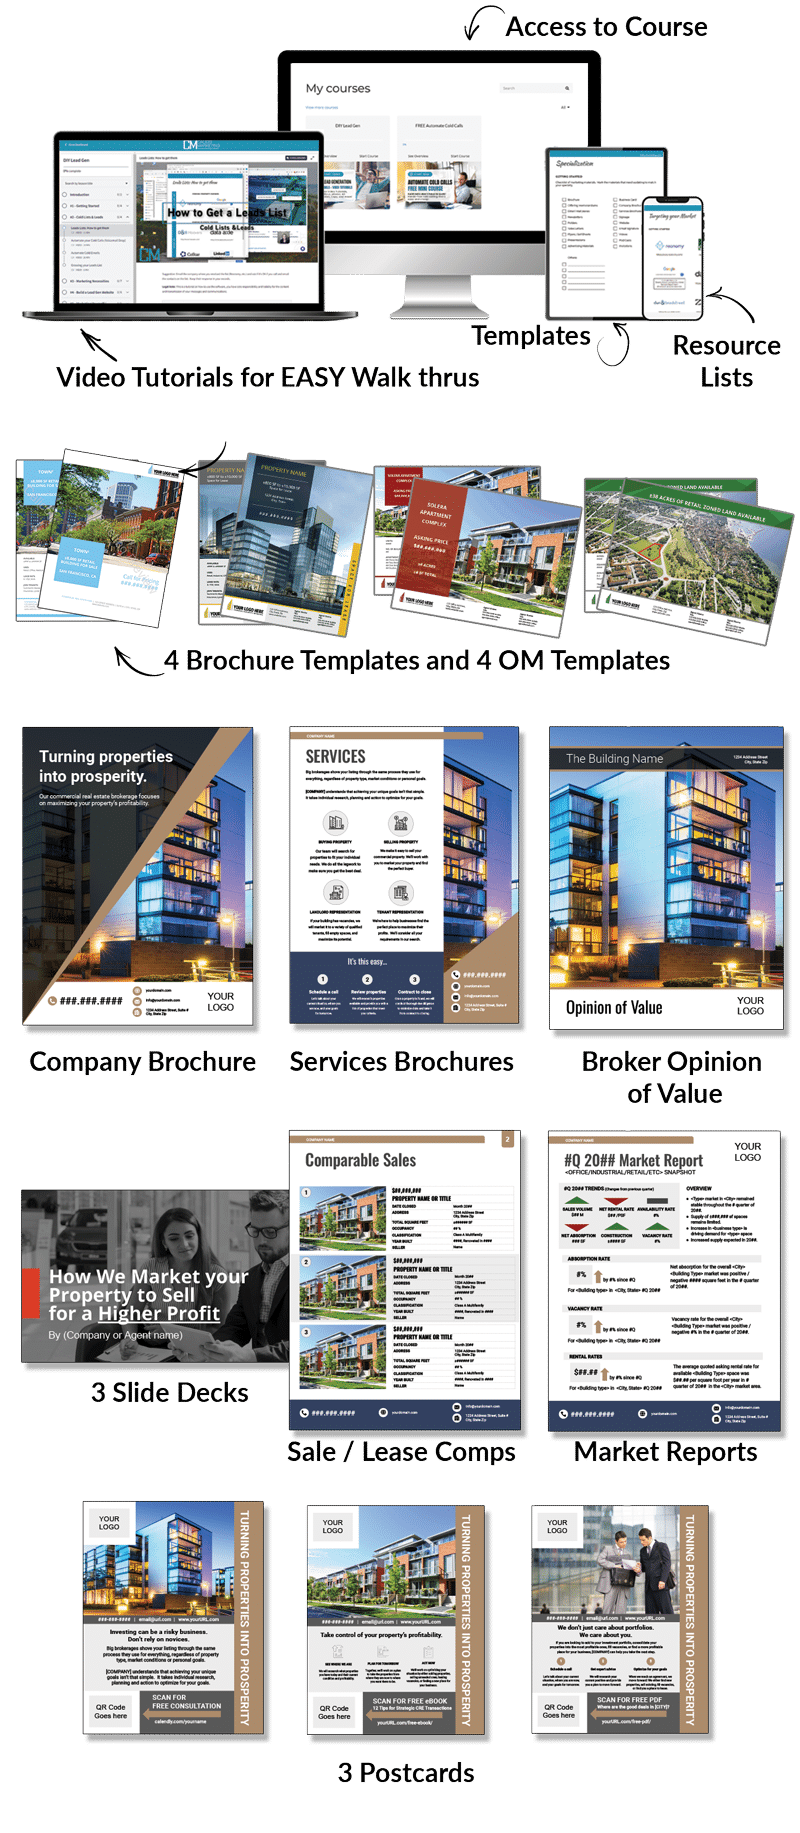 Mockups of all the commercial real estate marketing materials within the package.